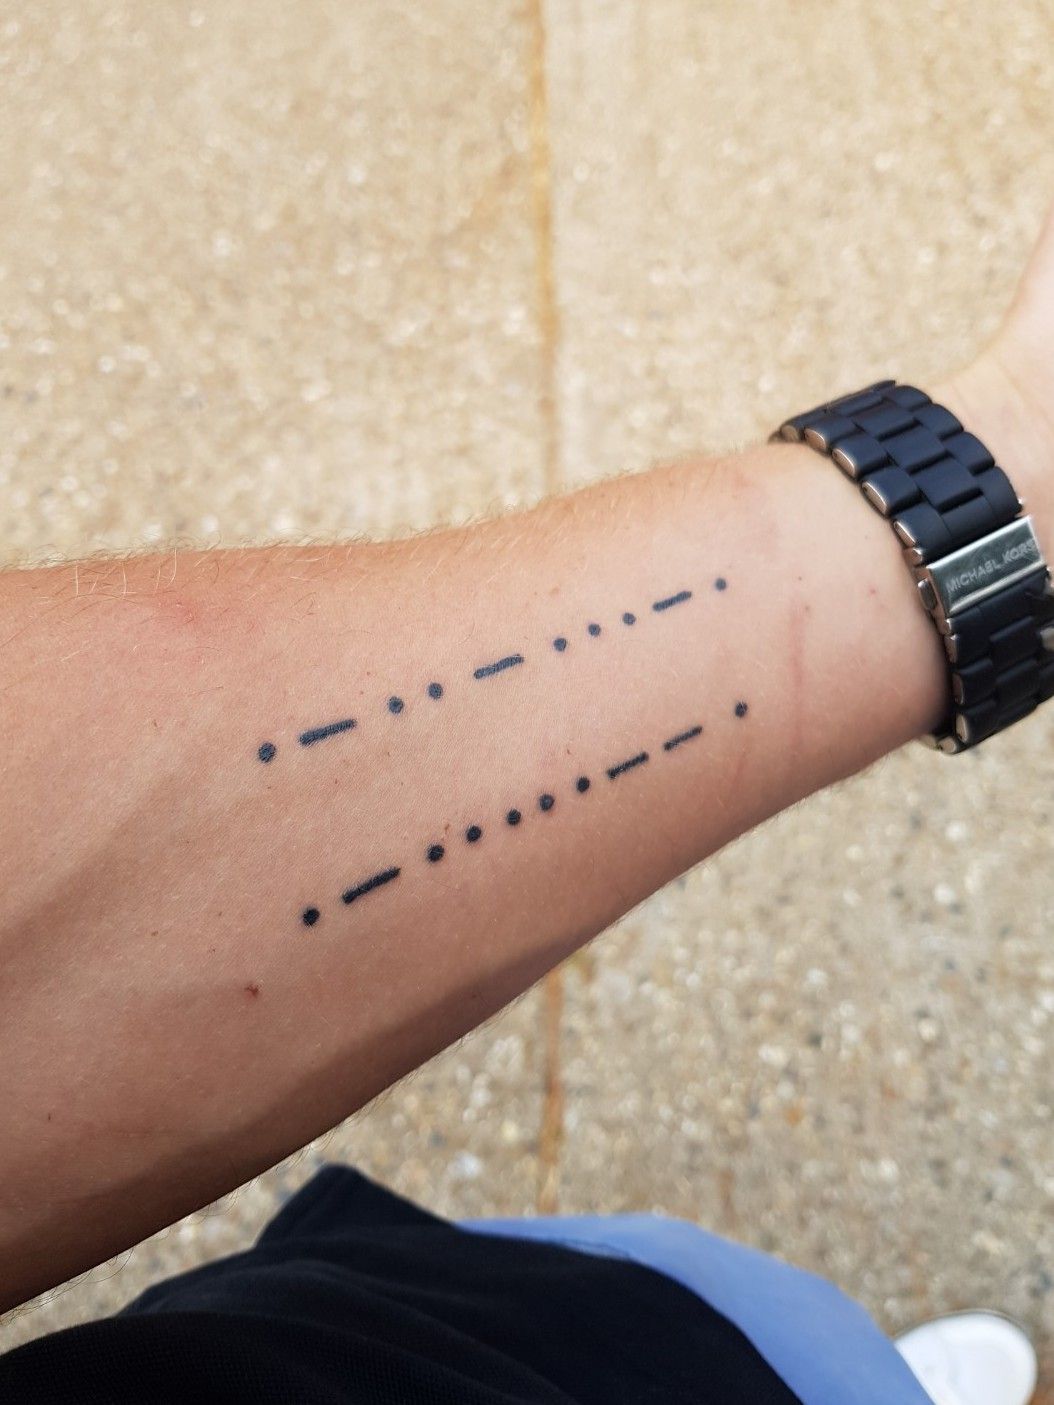 morse code tattoo discovered by Luciana Ancalmo